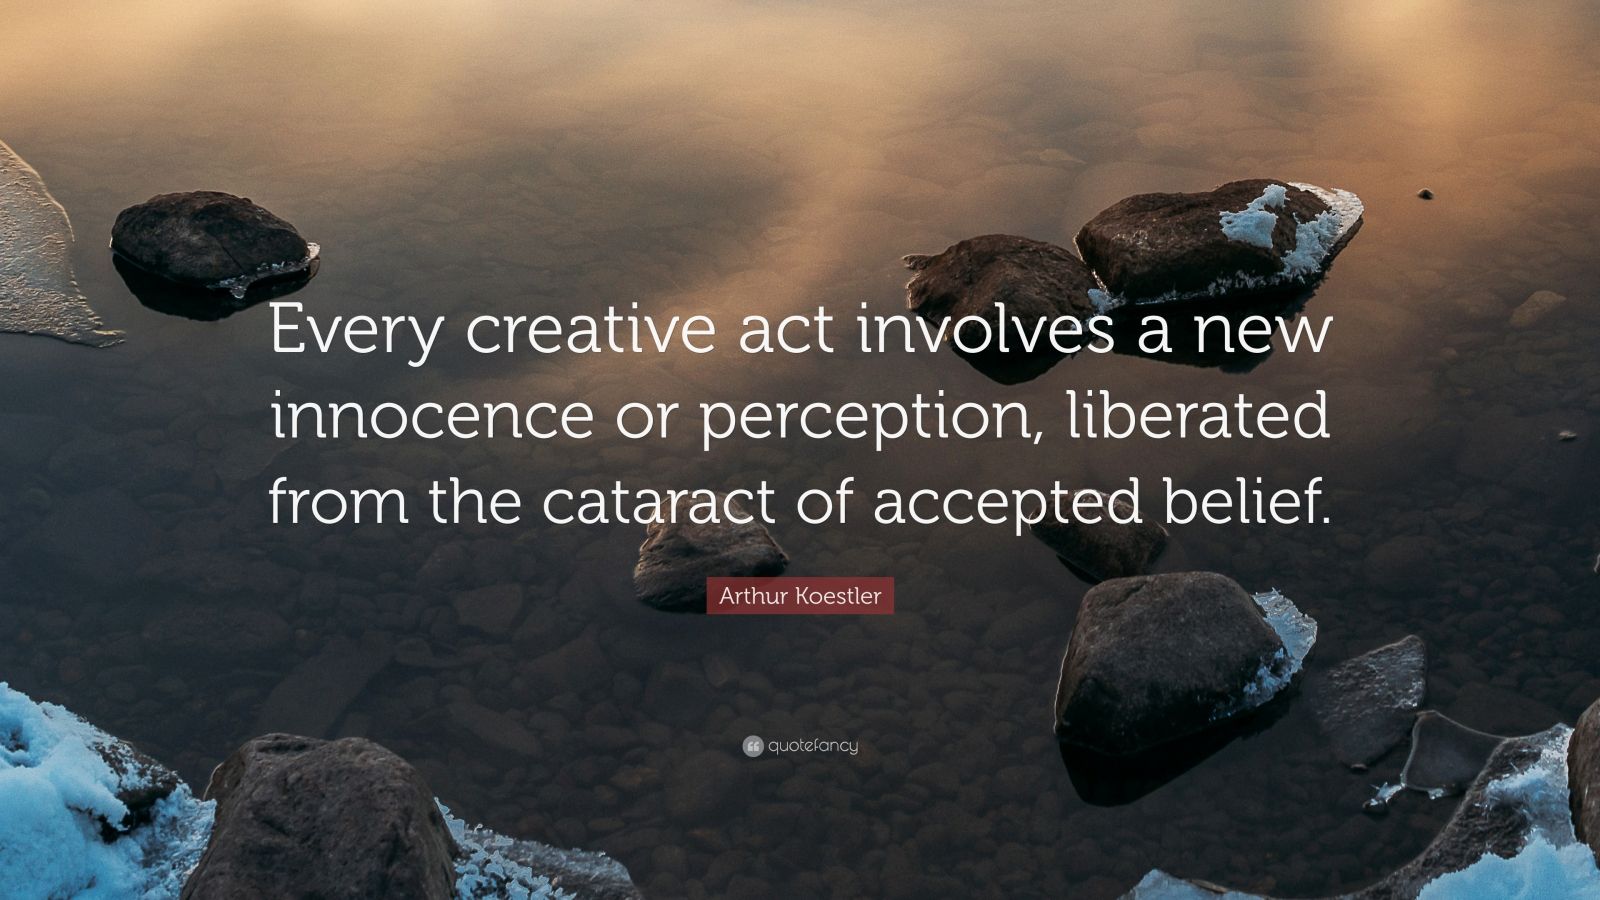 Arthur Koestler Quote: “Every creative act involves a new innocence or ...